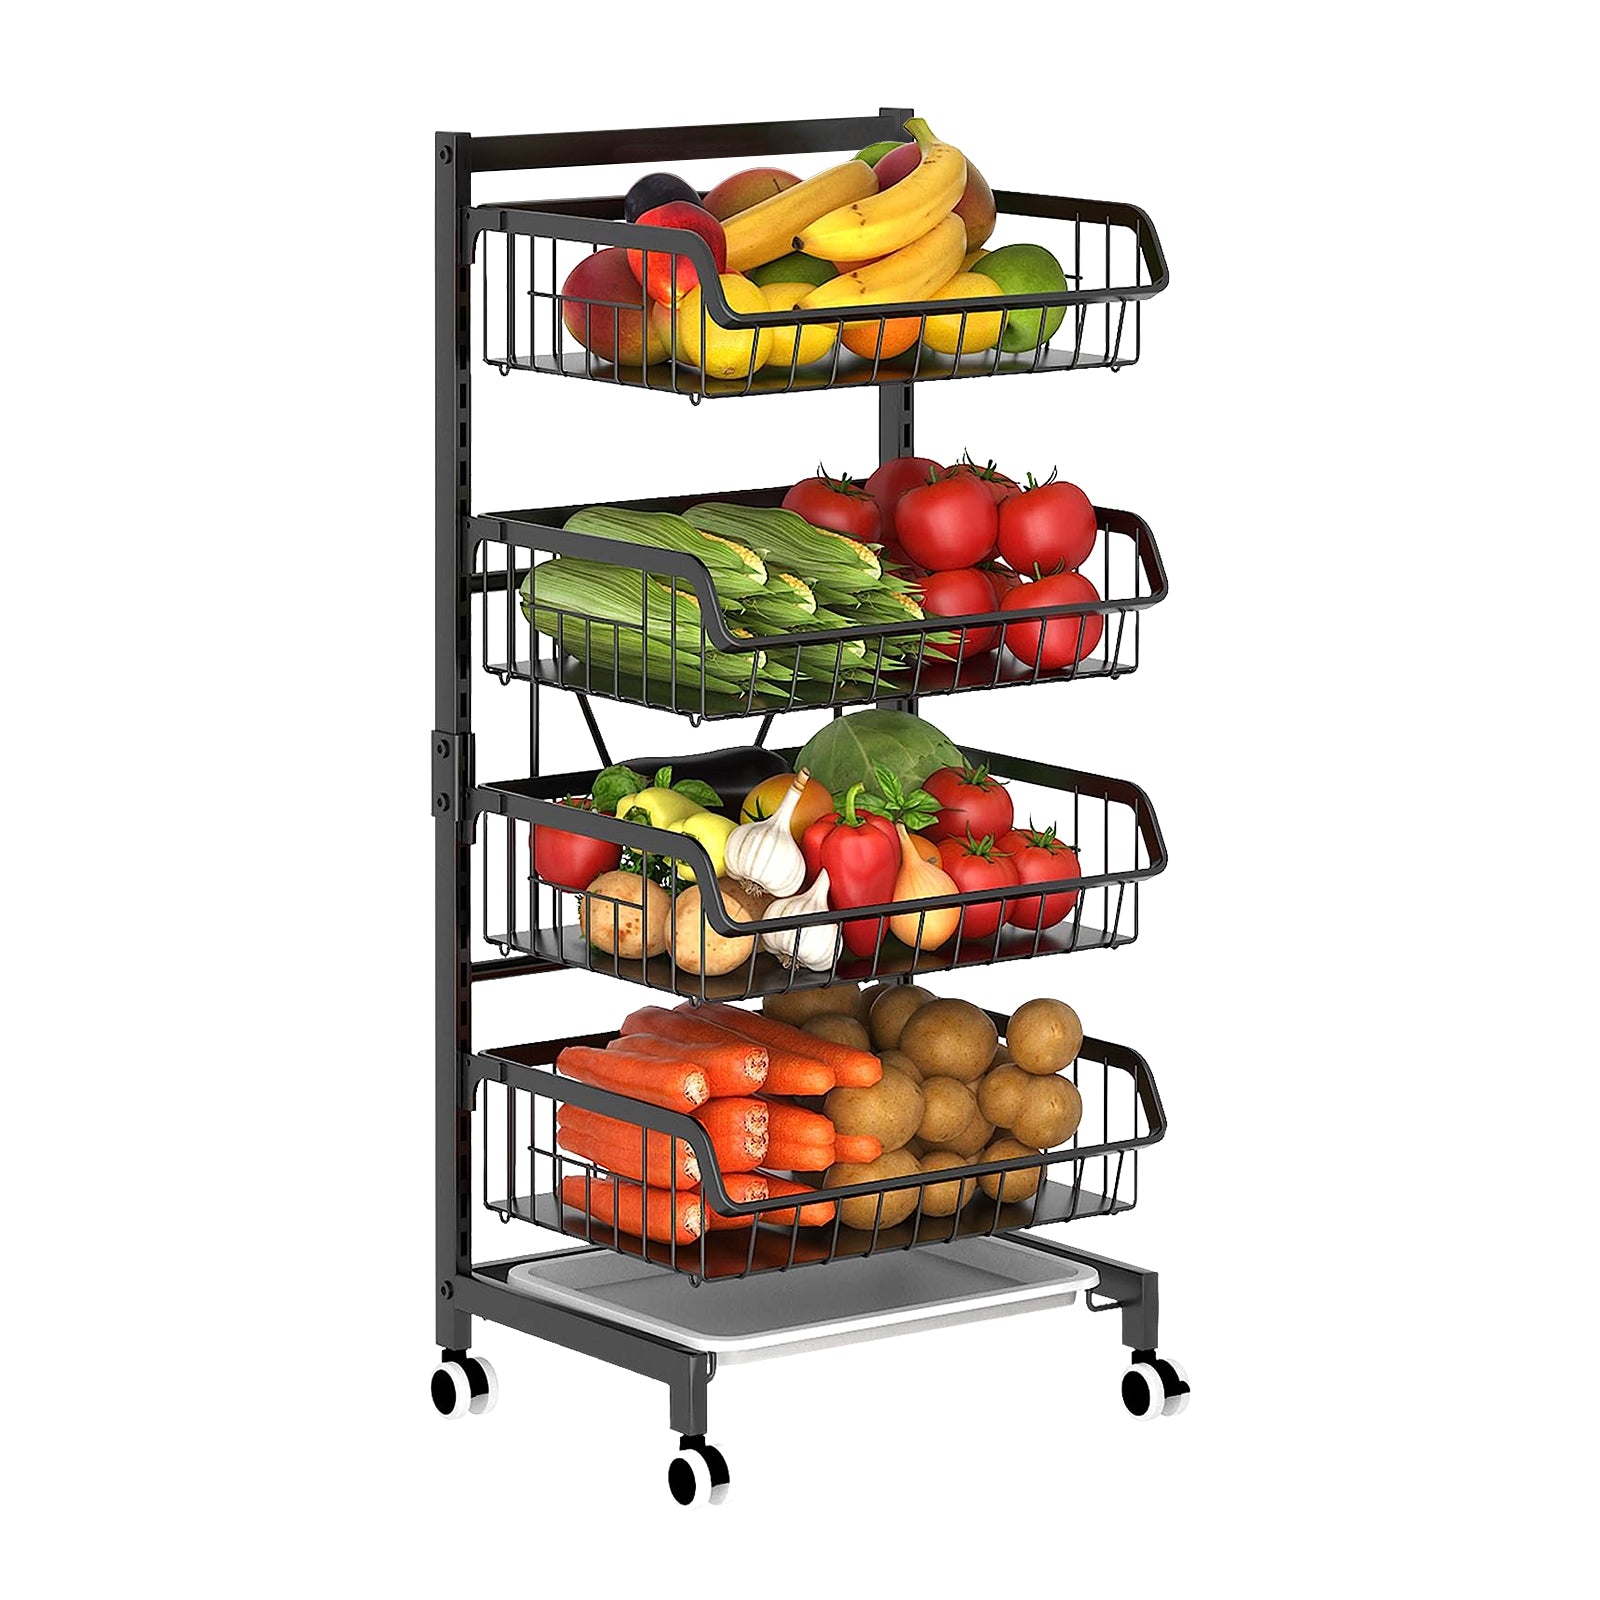 Todeco-Fruit-and-Vegetable-Basket-with-Wheels-Vegetable-Rack-for-Kitchen-4-Tiers-Storage-Cart-with-Locking-Casters-for-Kitchen-Fruits-Vegetables-Fruit-and-Vegetable-Basket-with-Wheels-4-Tiers-Storage-Cart